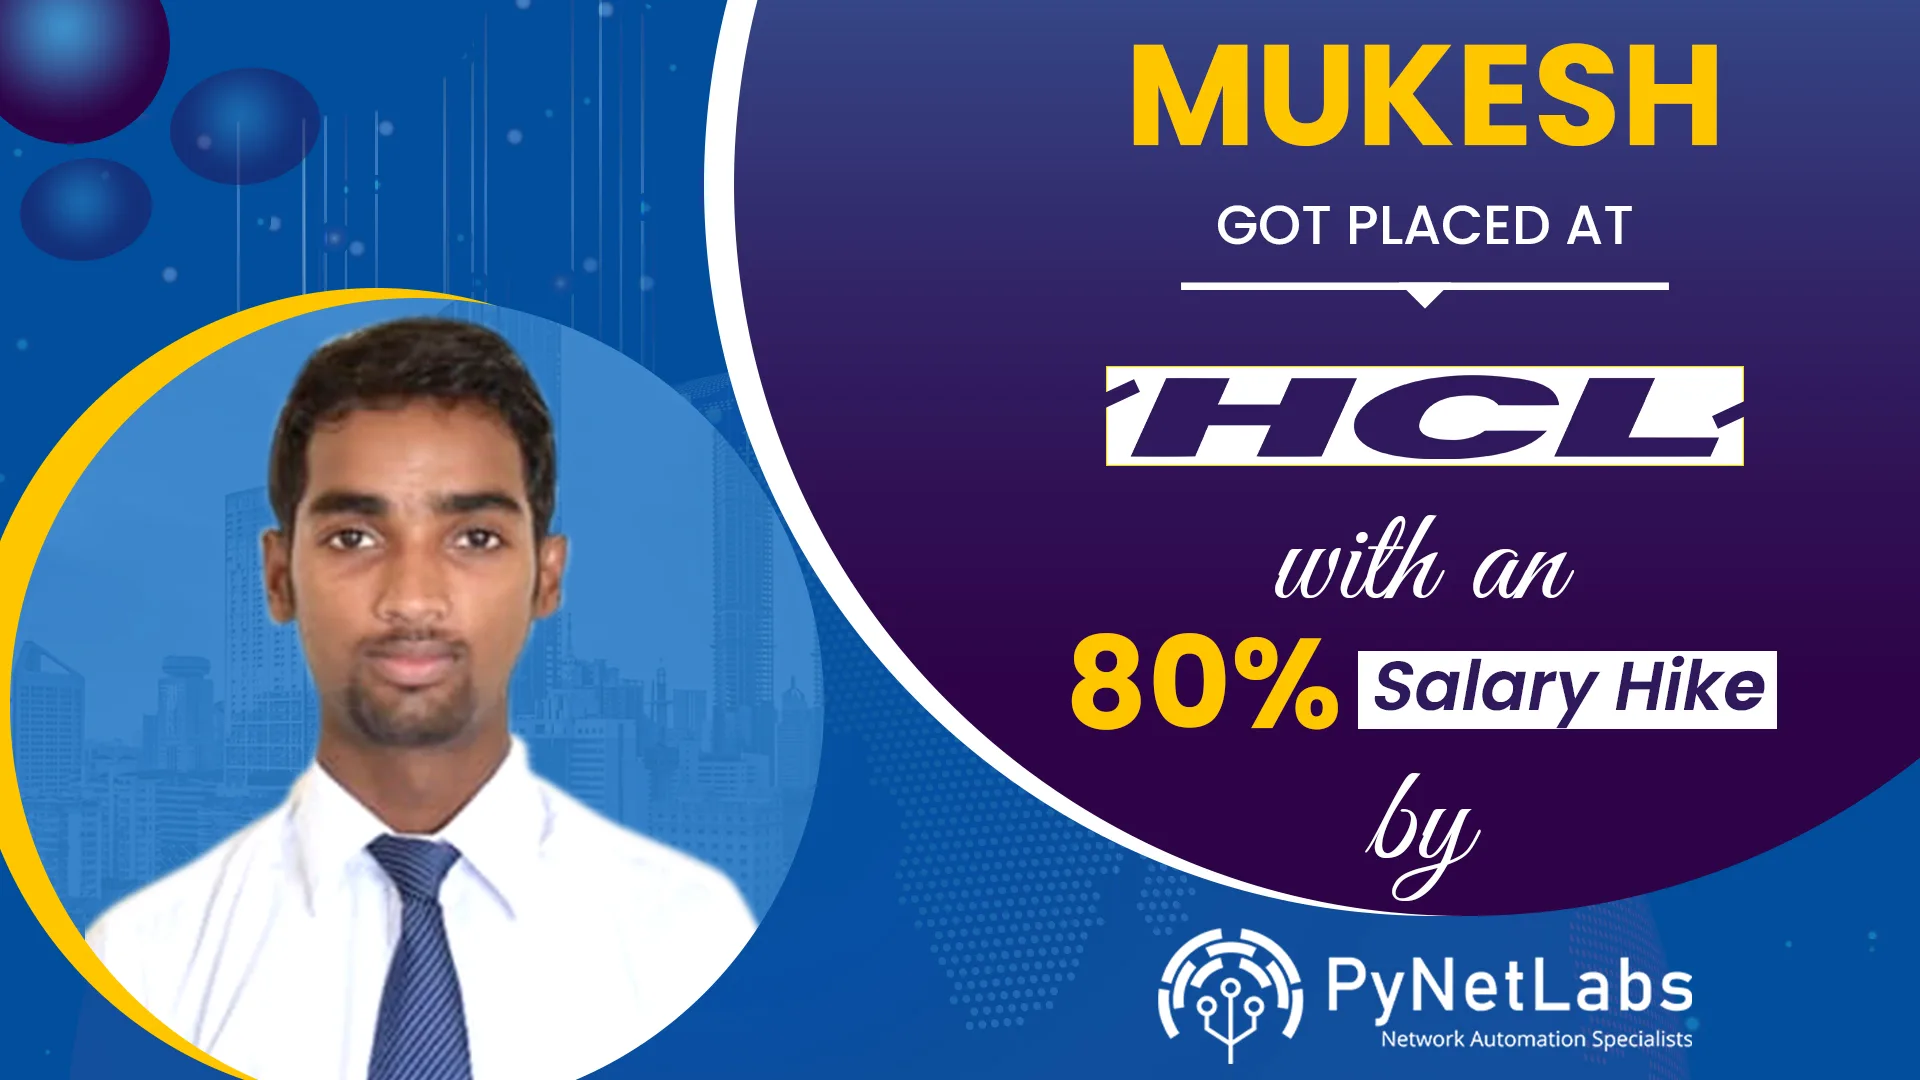 Mukesh got placed at HCL with an 80% Salary Hike by PyNet Labs